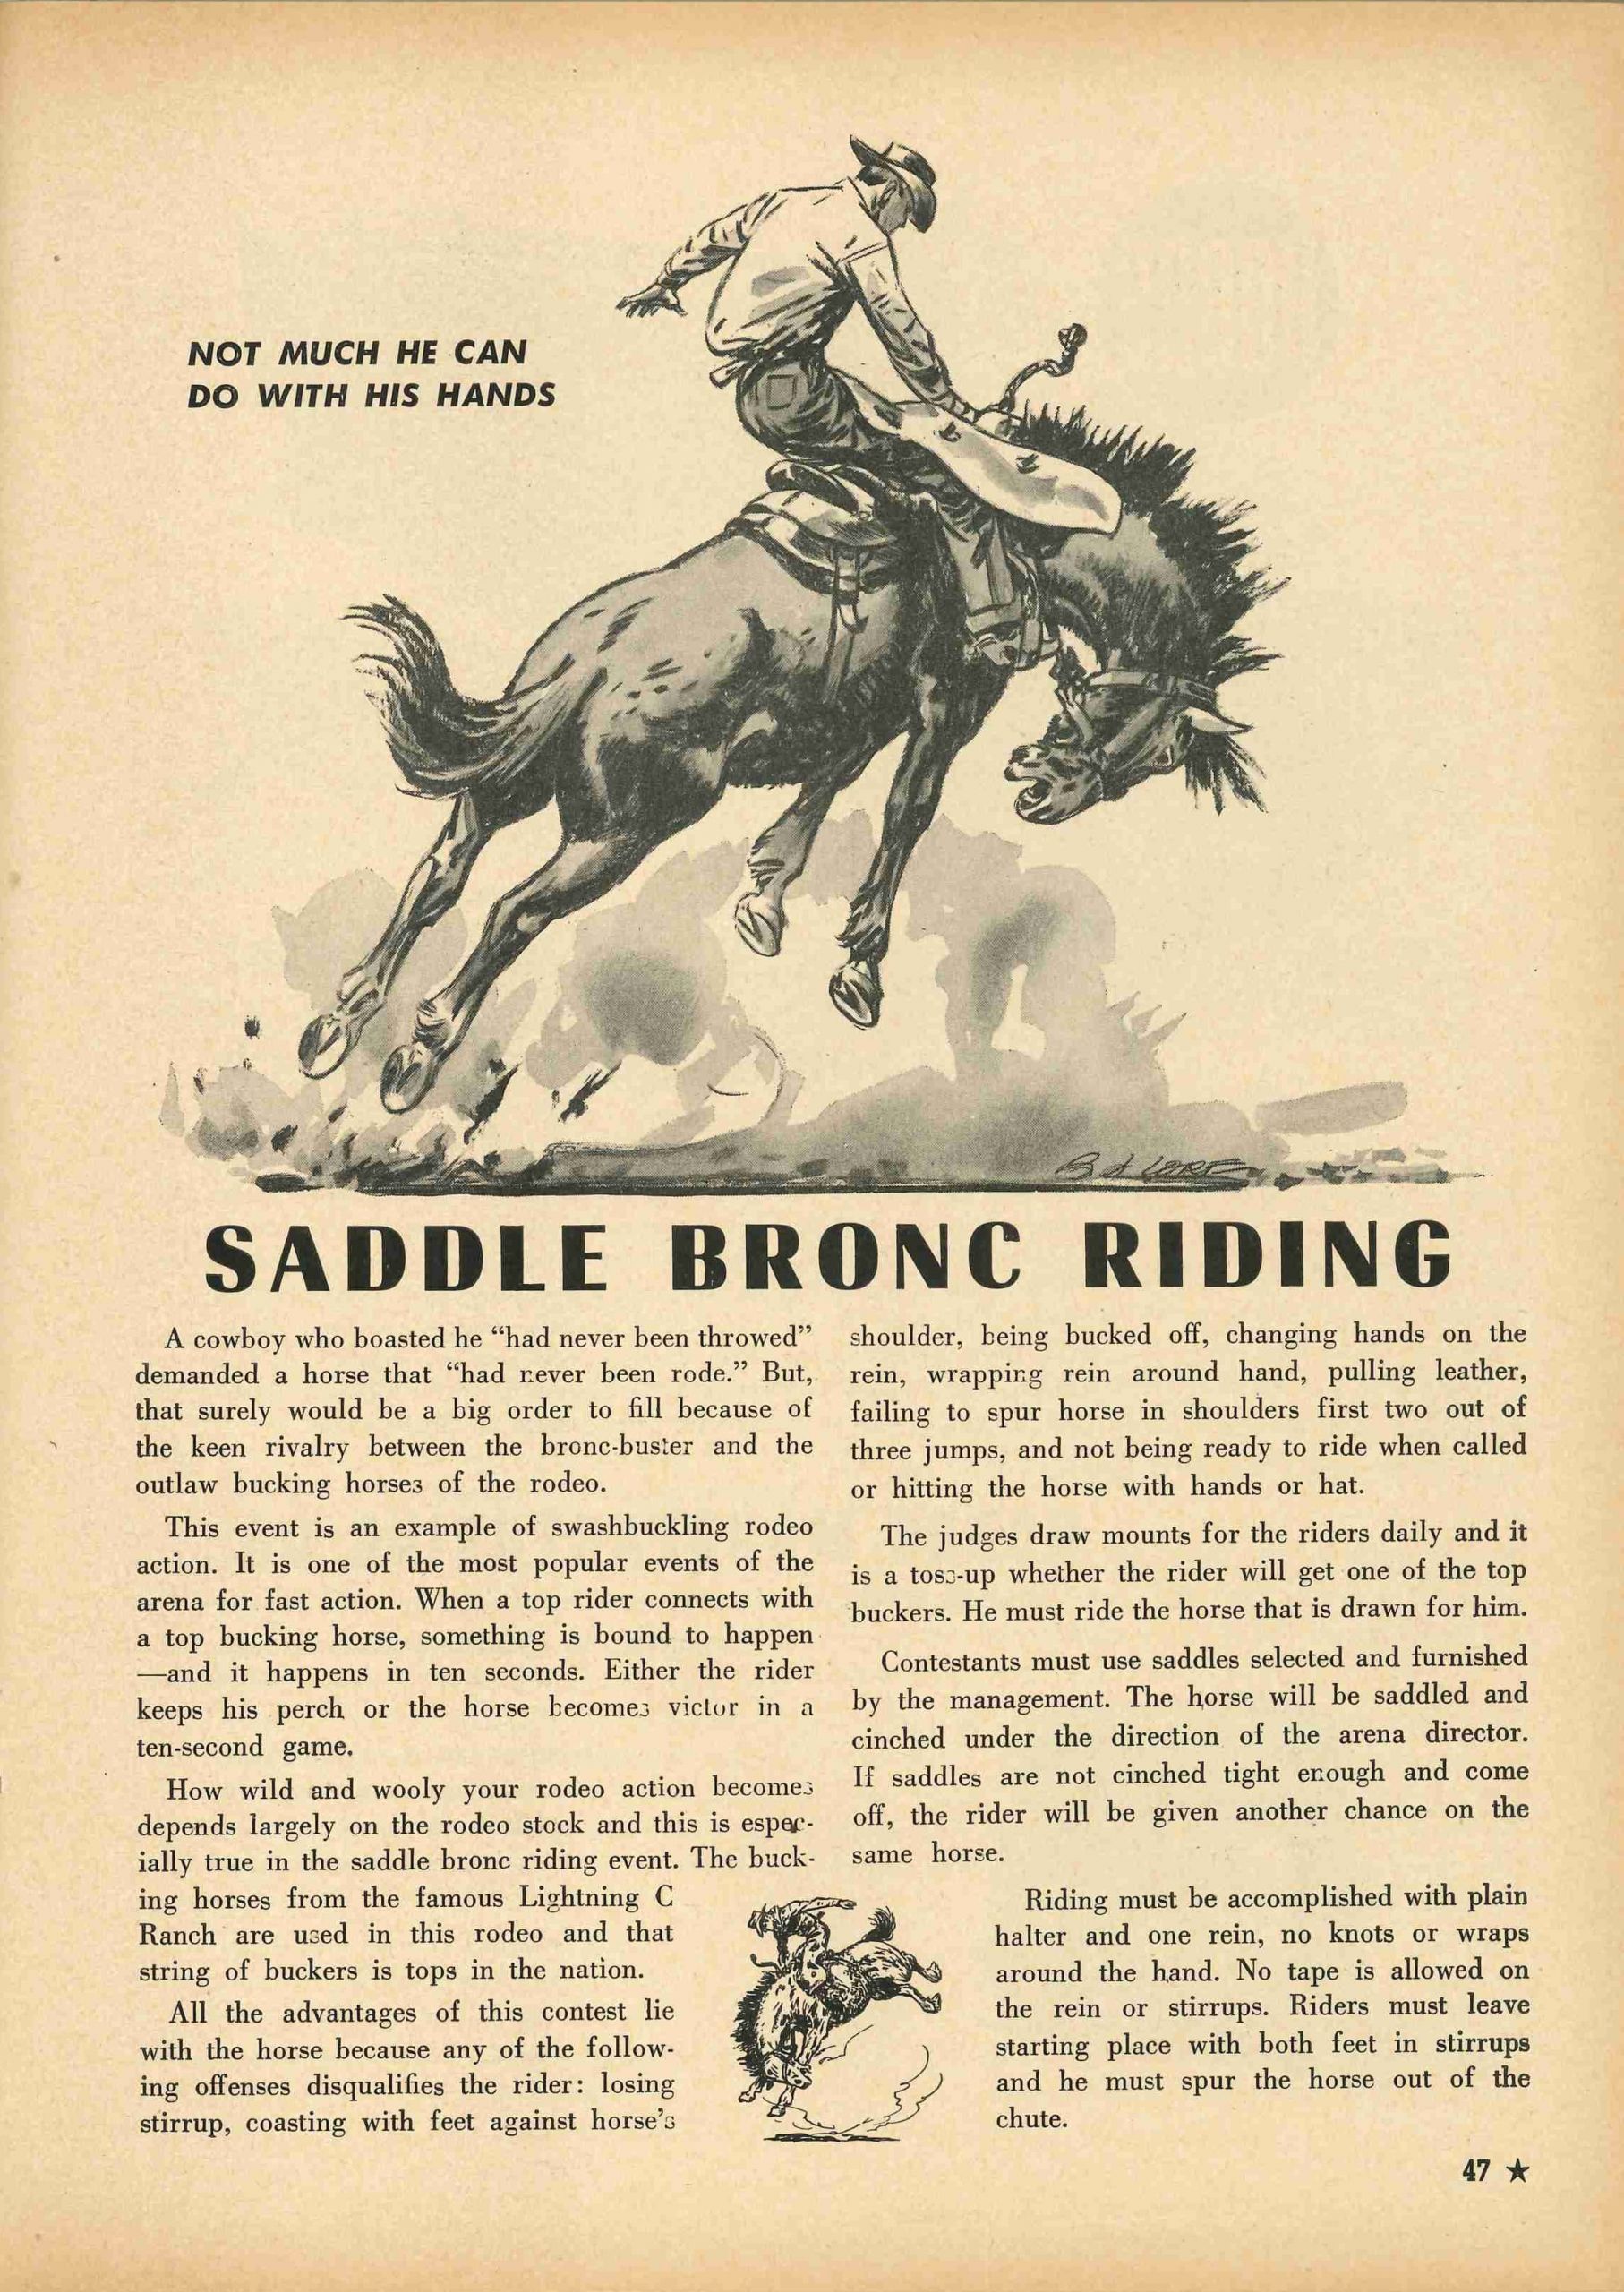 Page from stock show annual describing saddle bronc riding